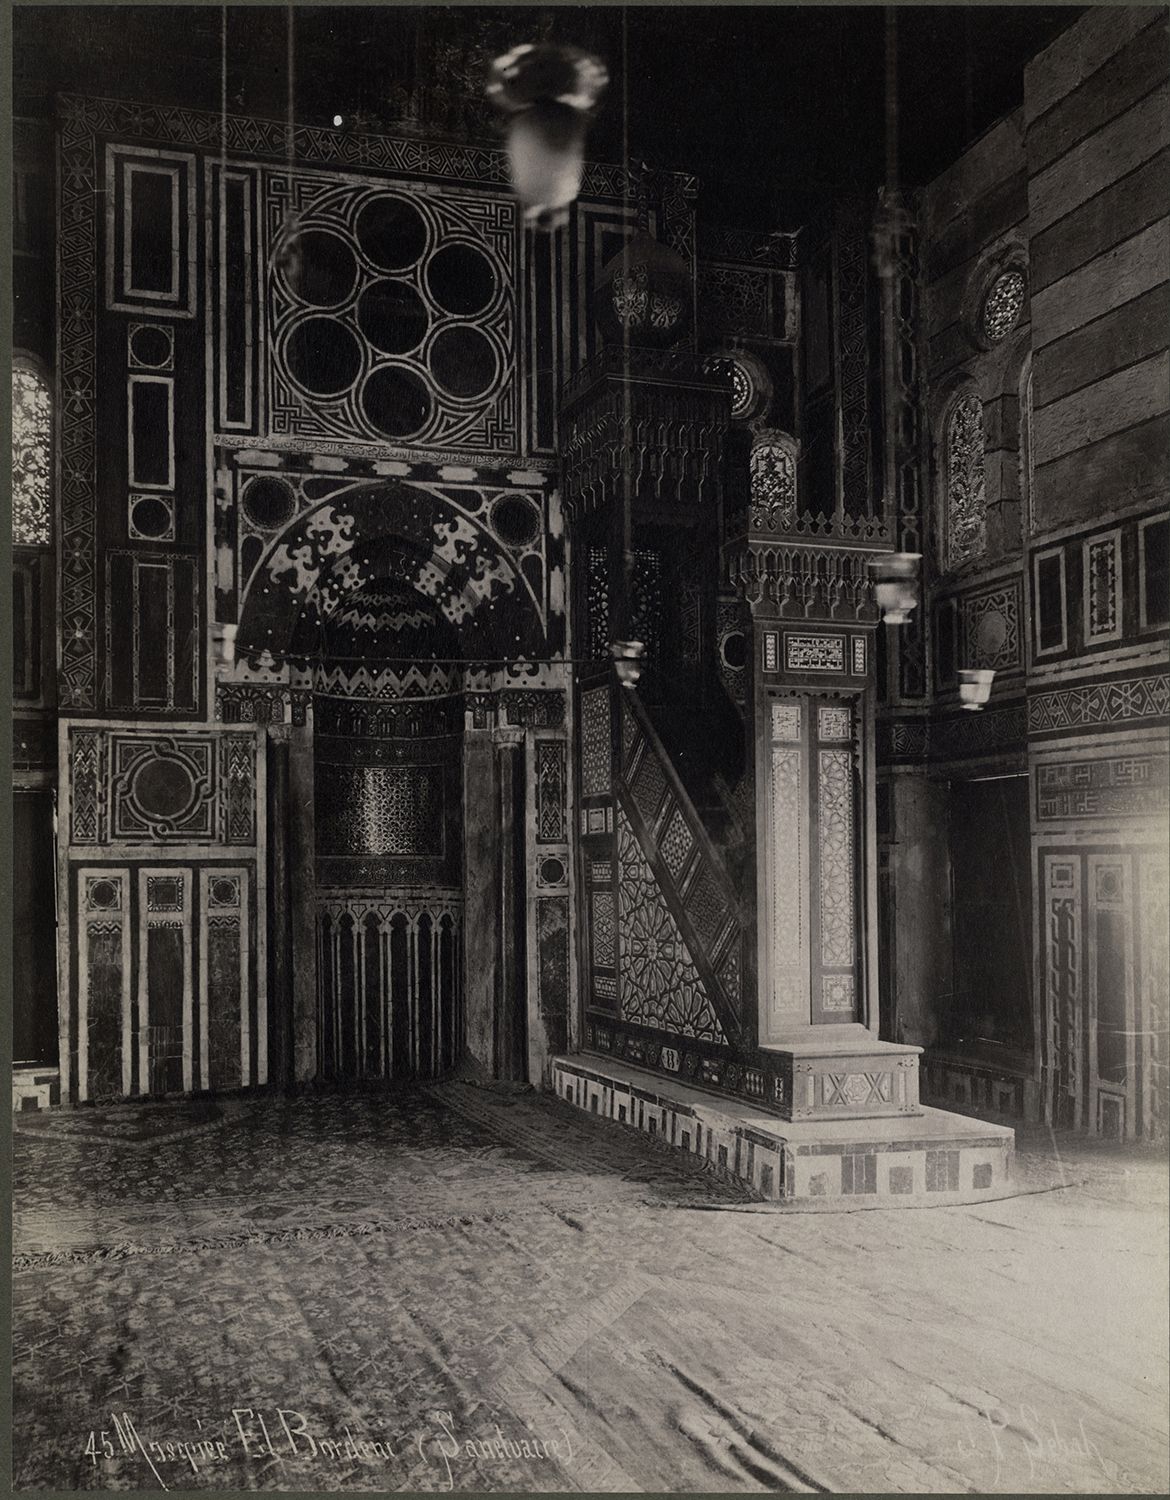 View of mihrab and minbar.